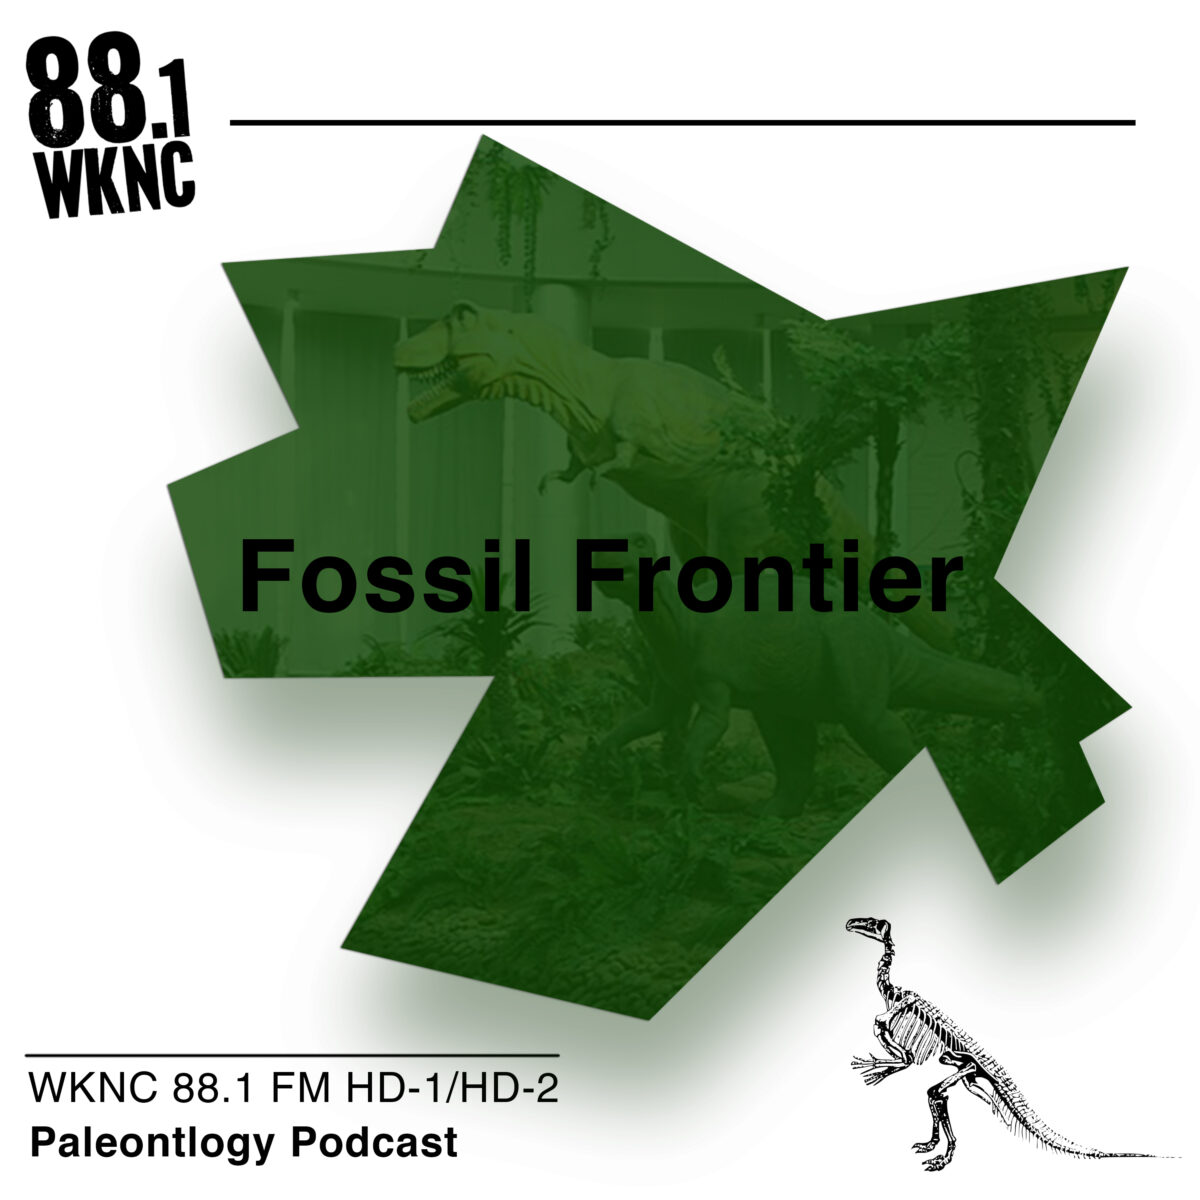 Fossil Frontier, a paleontology podcast from WKNC 88.1 FM HD-1/HD-2